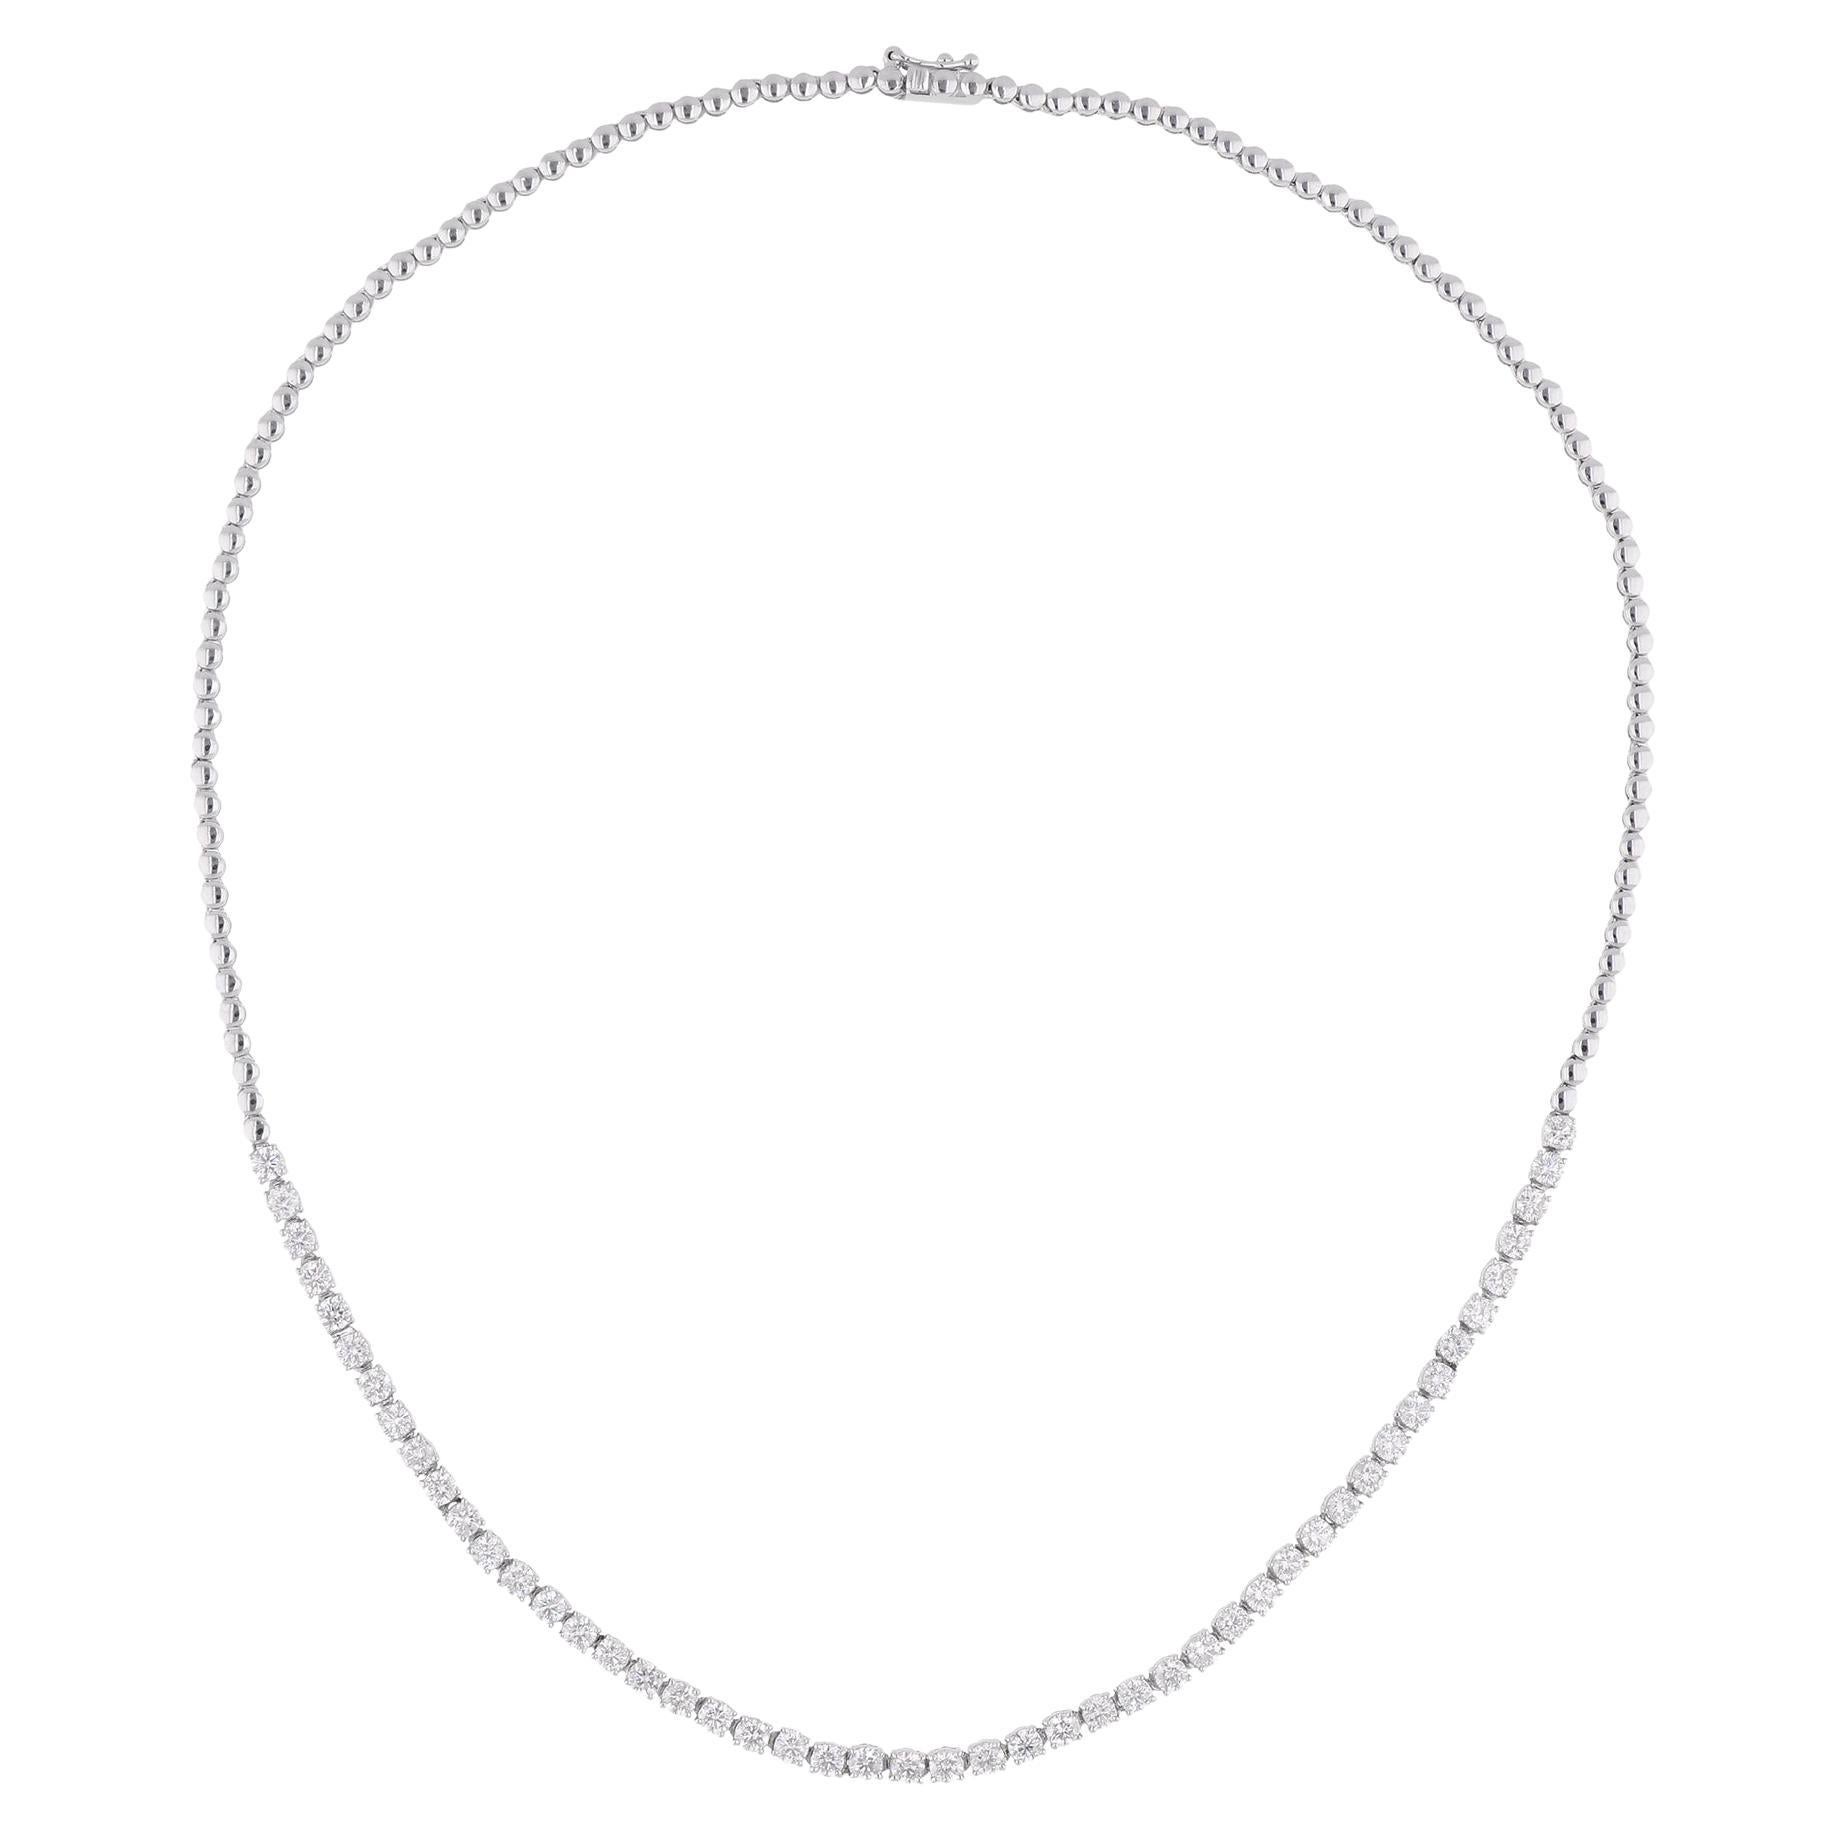 Natural 3.81 Carat Round Diamond Necklace Solid 18 Karat White Gold Fine Jewelry For Sale